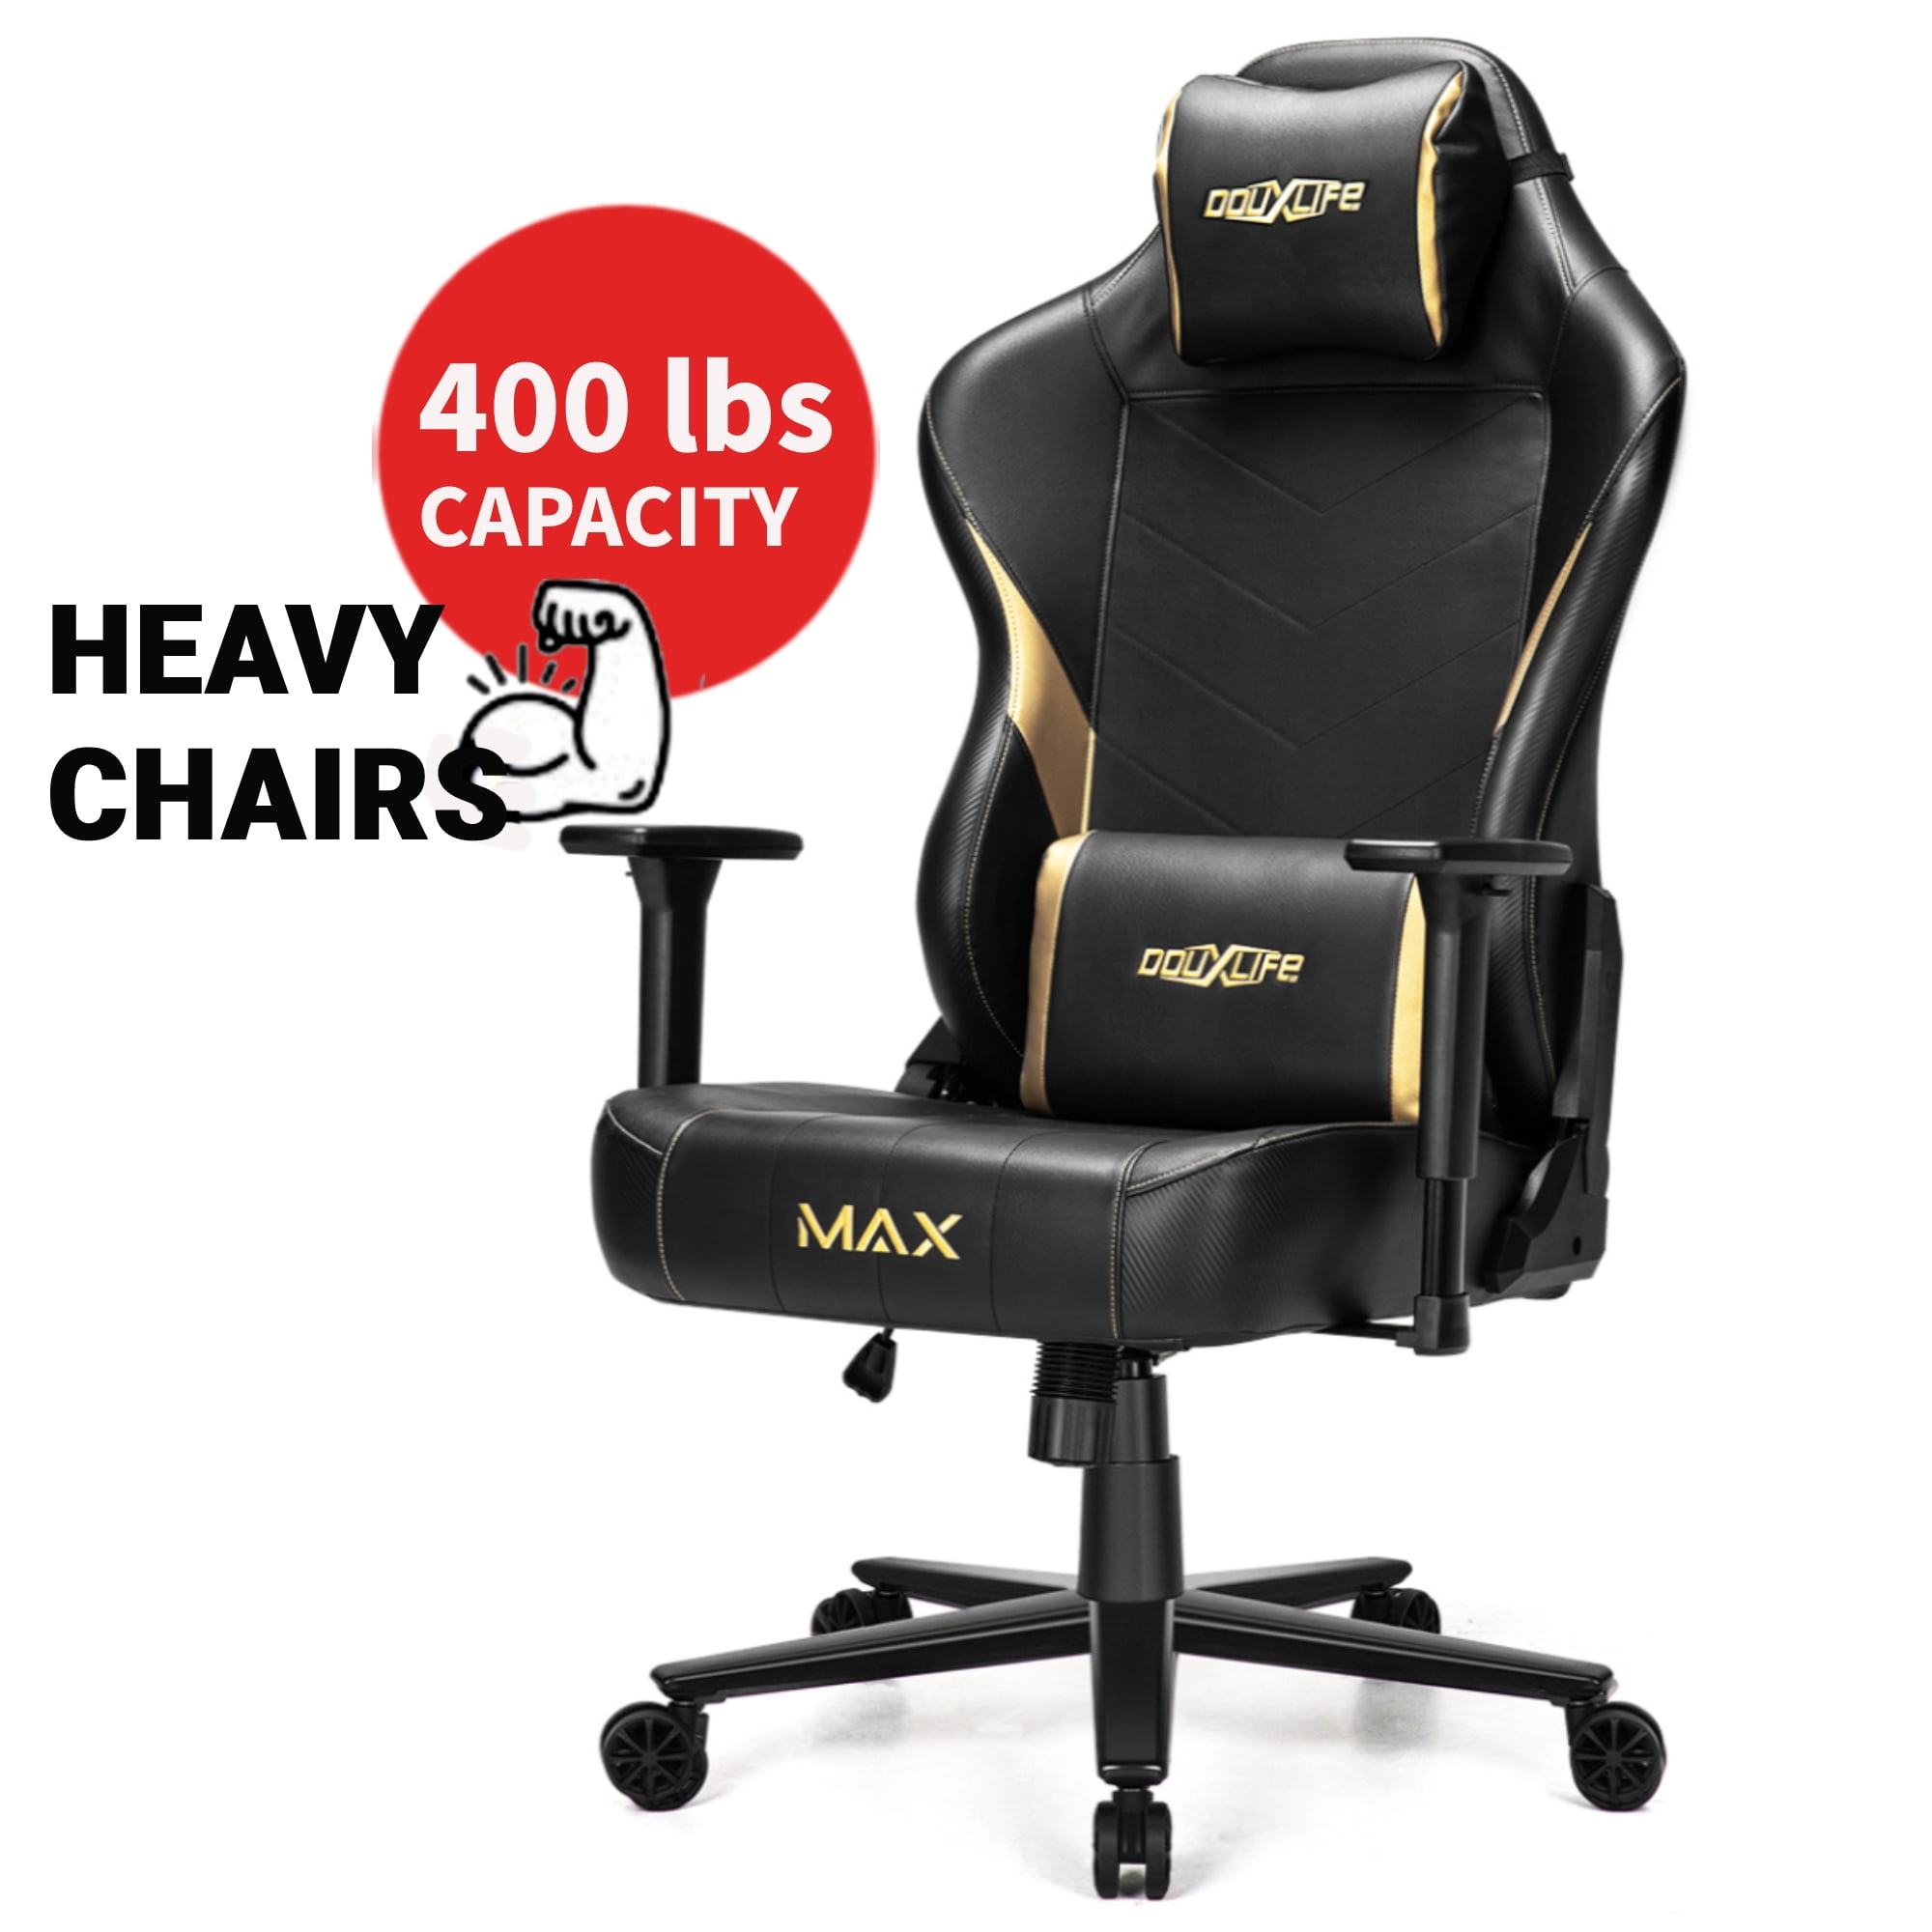 Douxlife Big&Tall Heavy Duty Gaming Chairs for Adults 400 lbs, Ergonomic  Office Computer Comfy Gaming Chair, Executive Wide Seat High Back Office